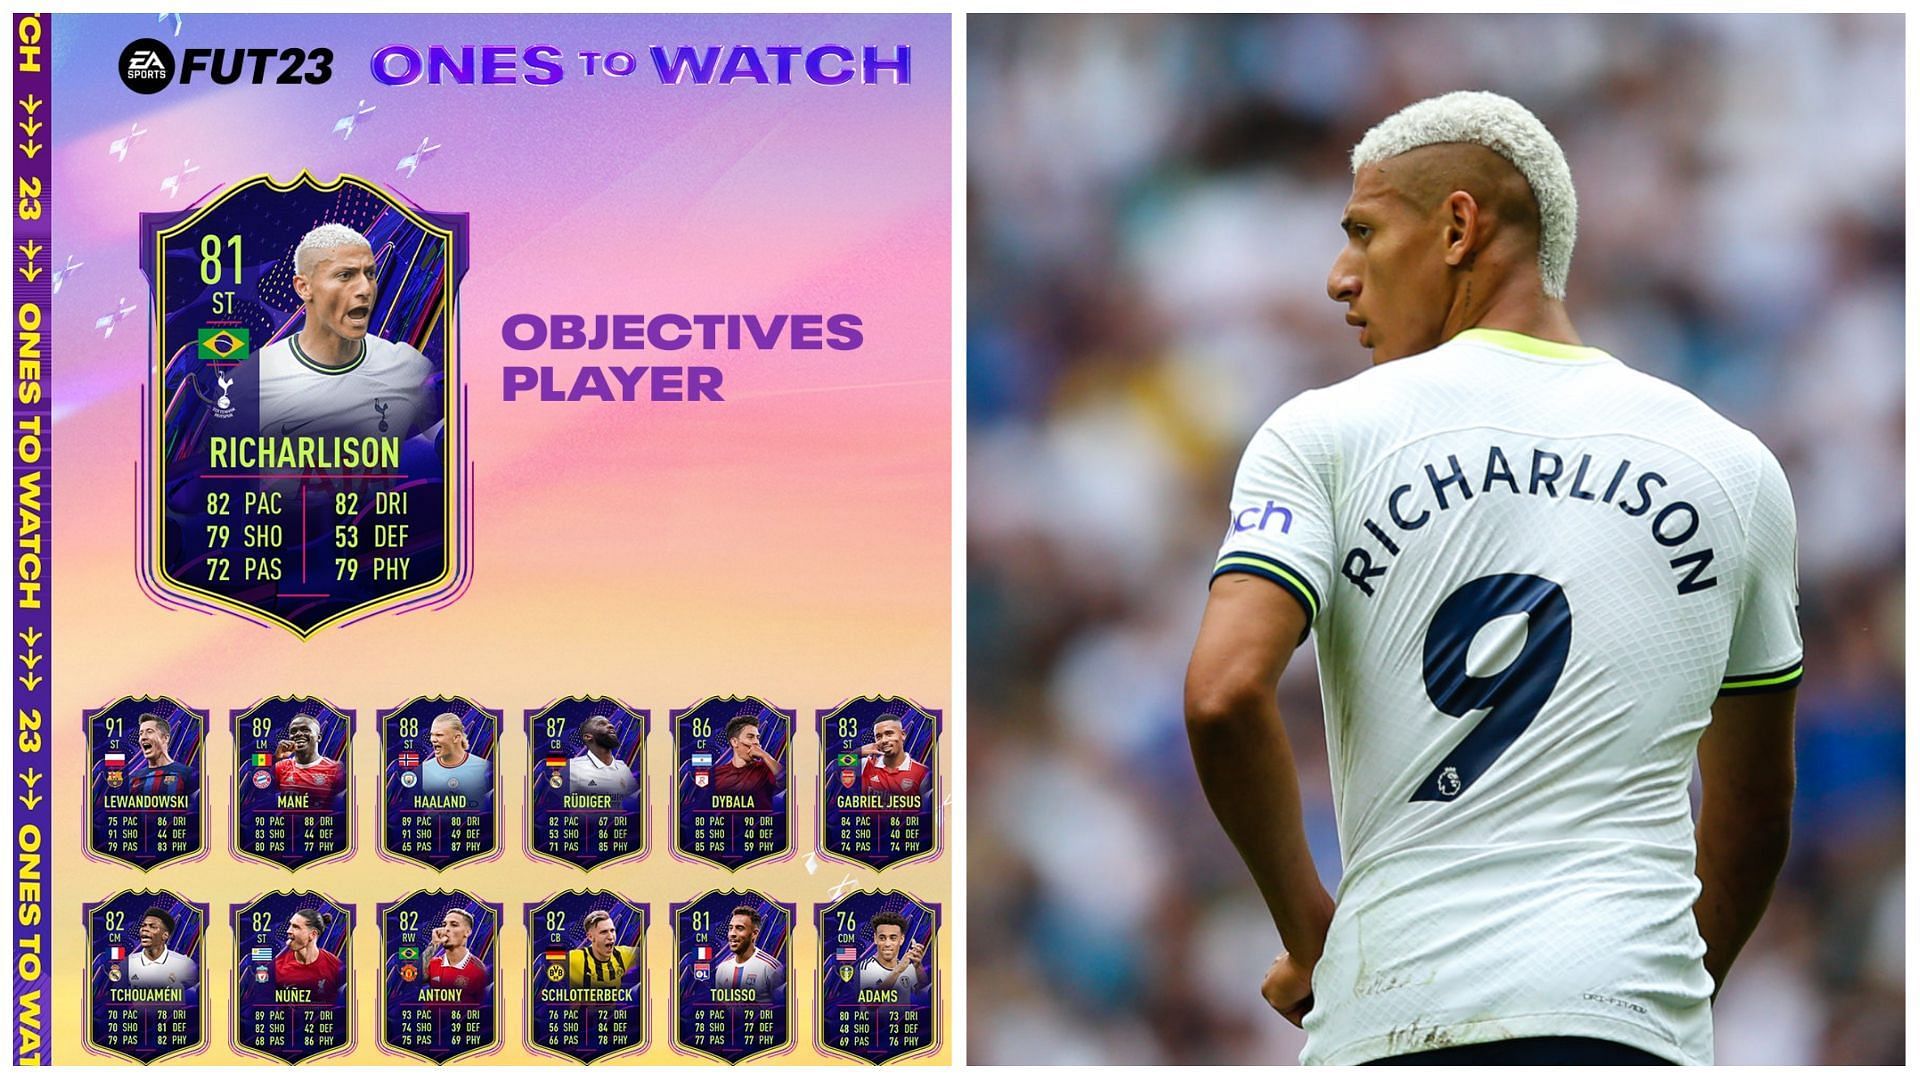 OTW Richarlison has been released as an objective in FIFA 23 (Images via EA Sports and Getty Images)